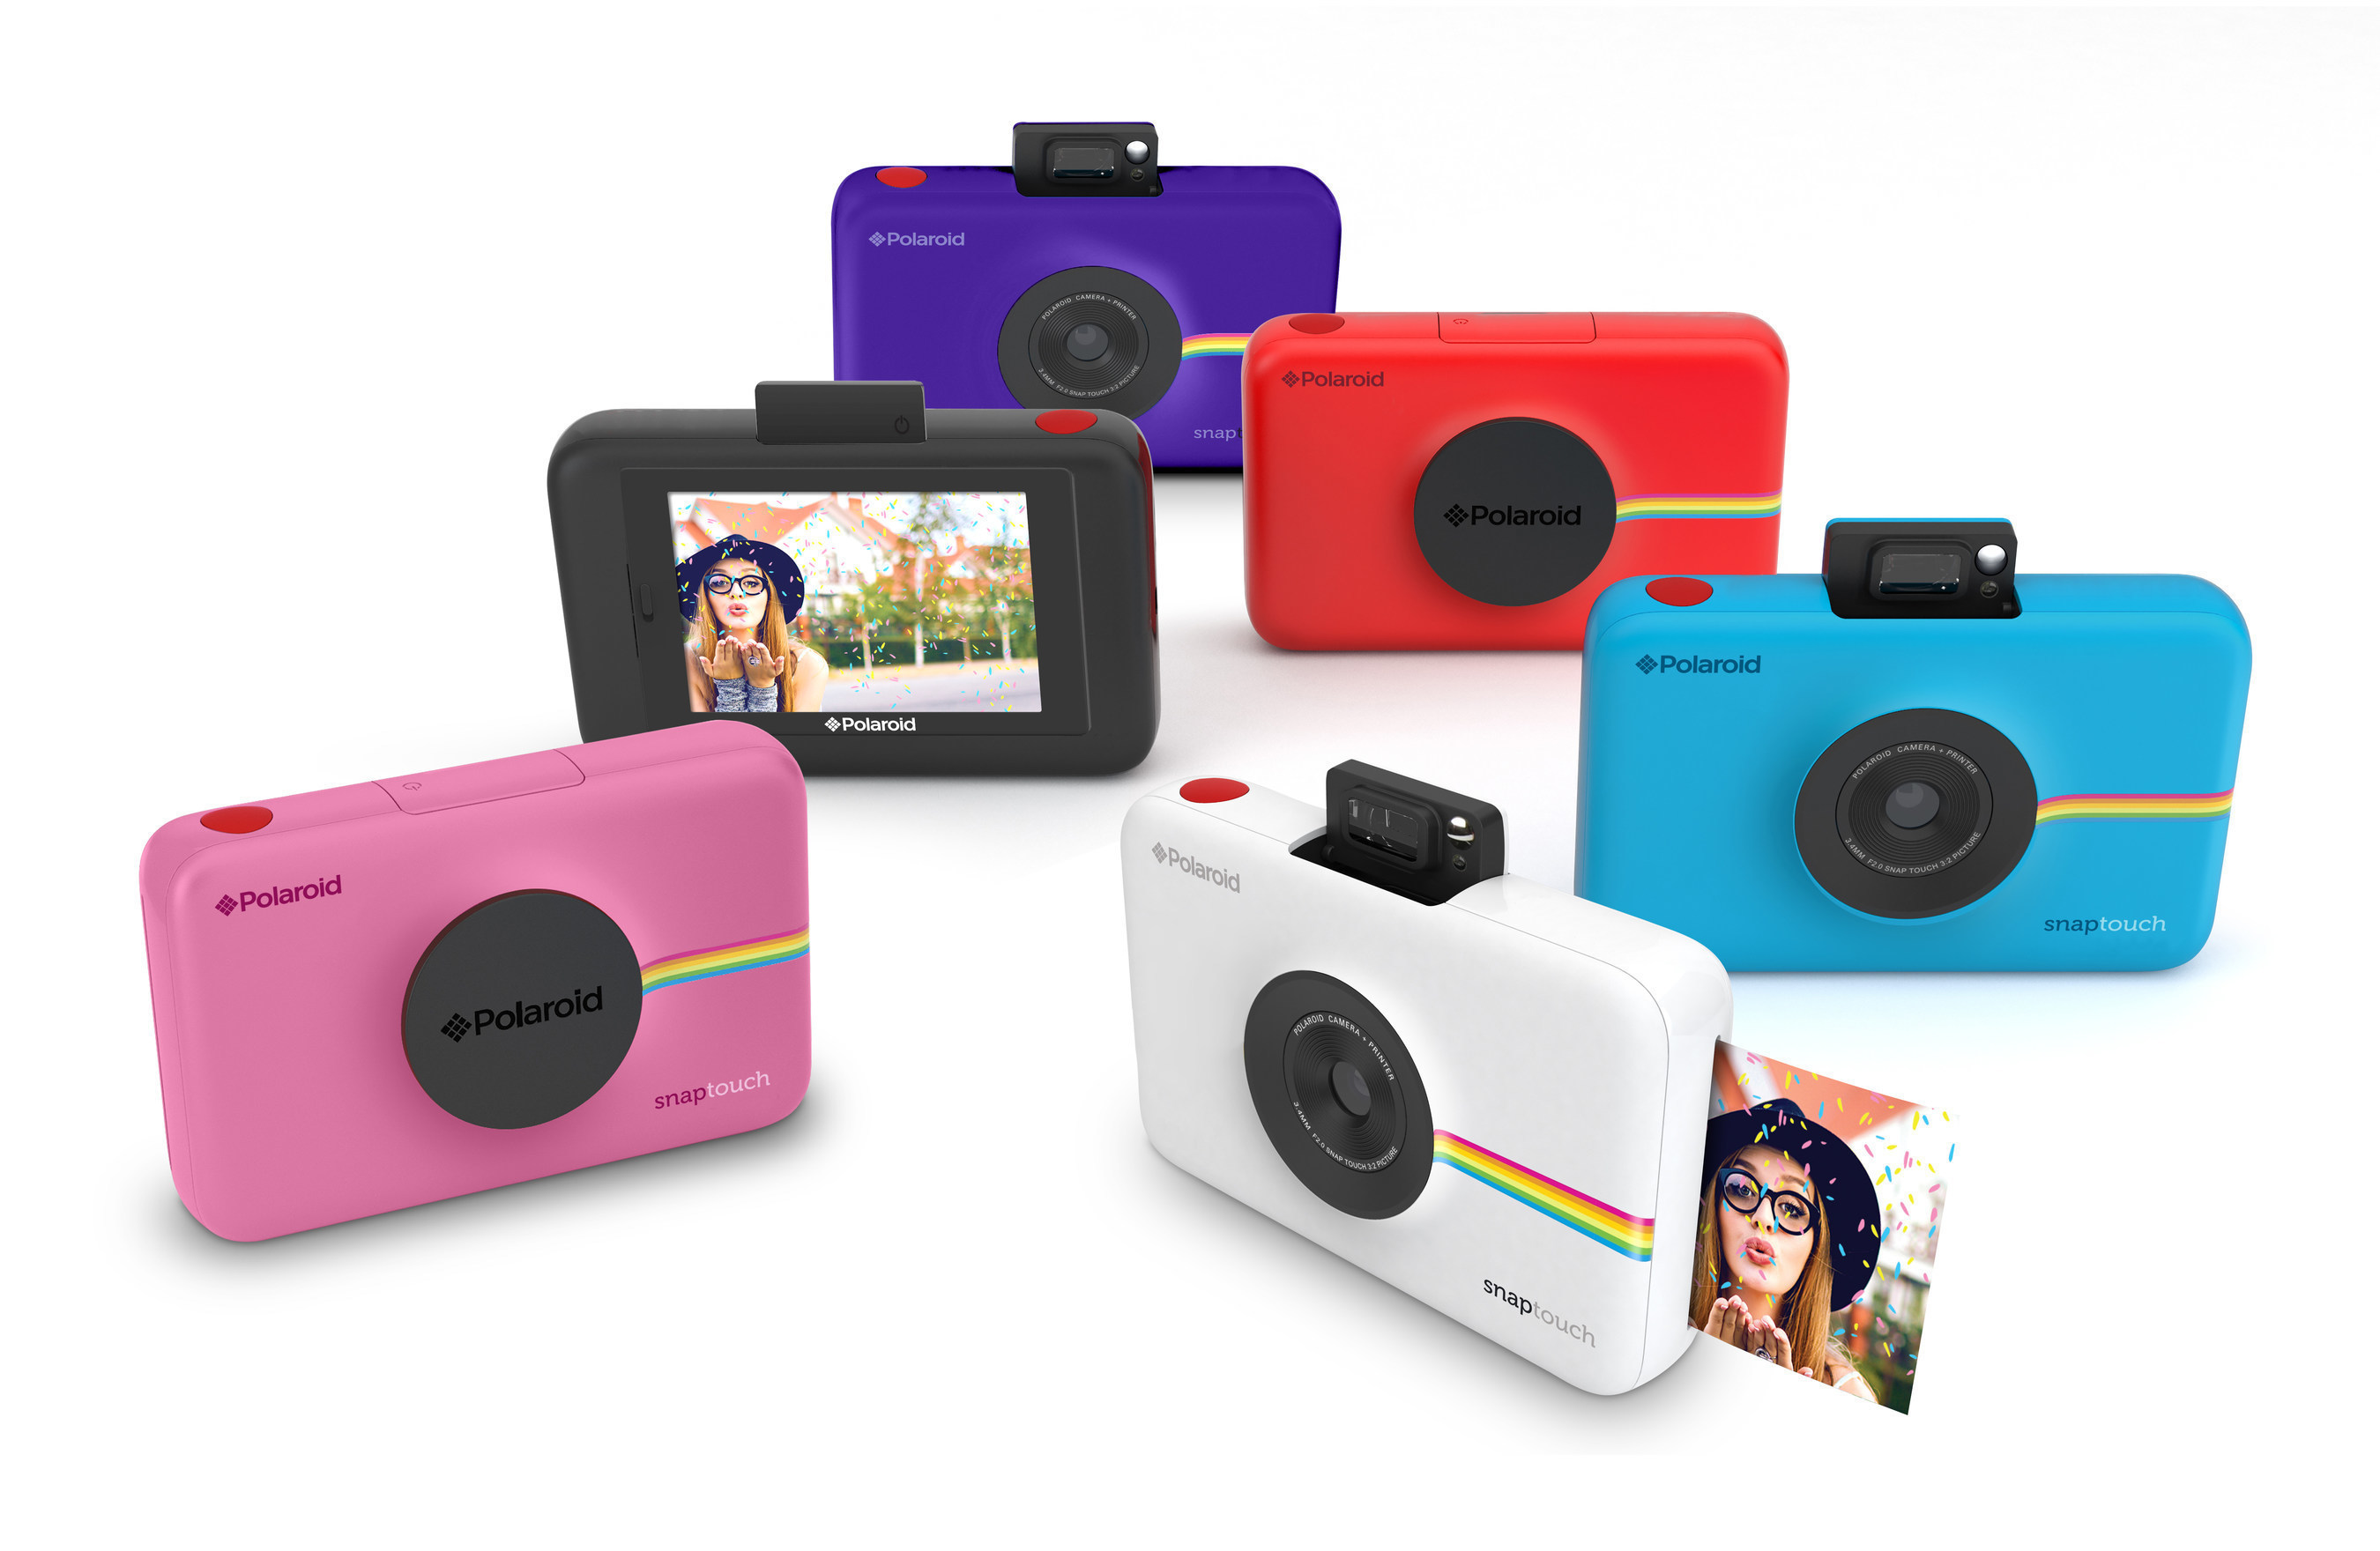 Global Release for its Next Generation Instant Digital Camera, the Polaroid Snap Touch